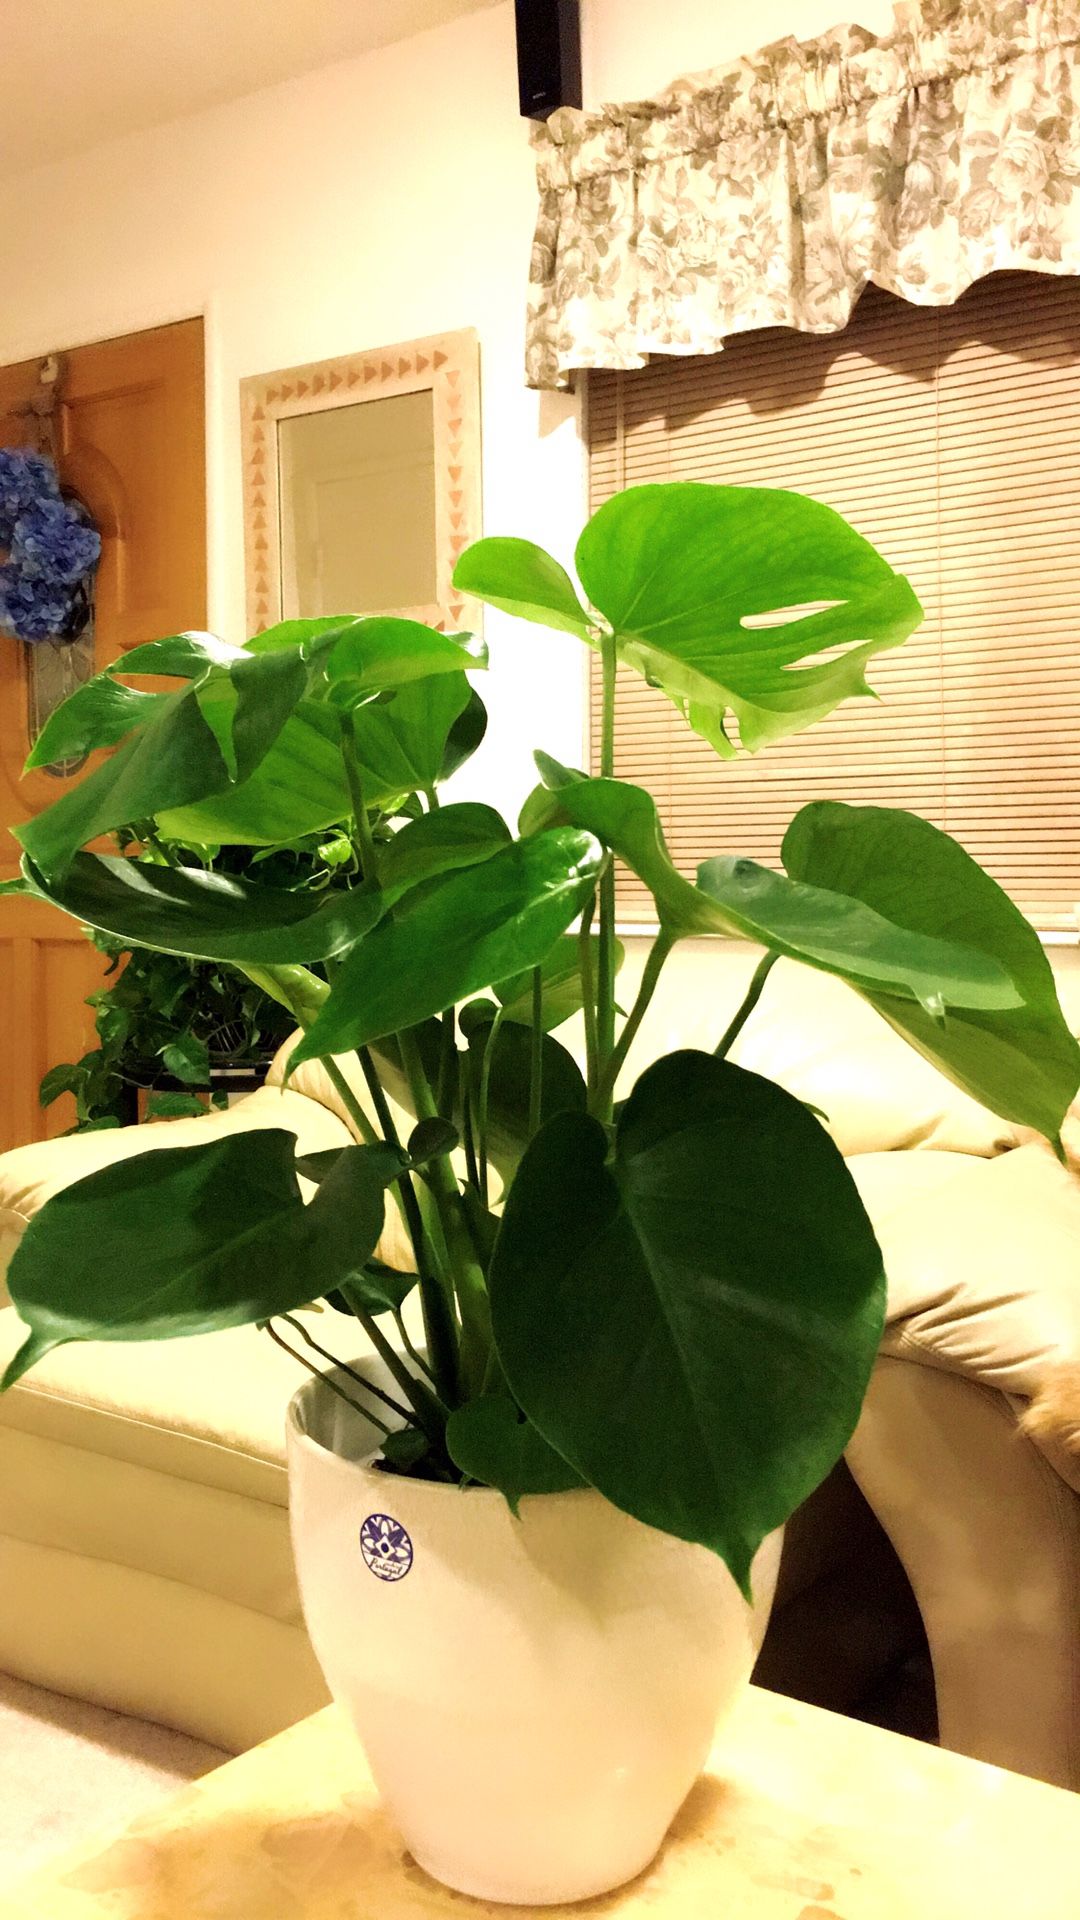 Monstera Deliciosa Split Leaf Philodendron - Swiss Cheese House Plant - About 20” Tall Plant only - PLANTER IS NOT INCLUDED